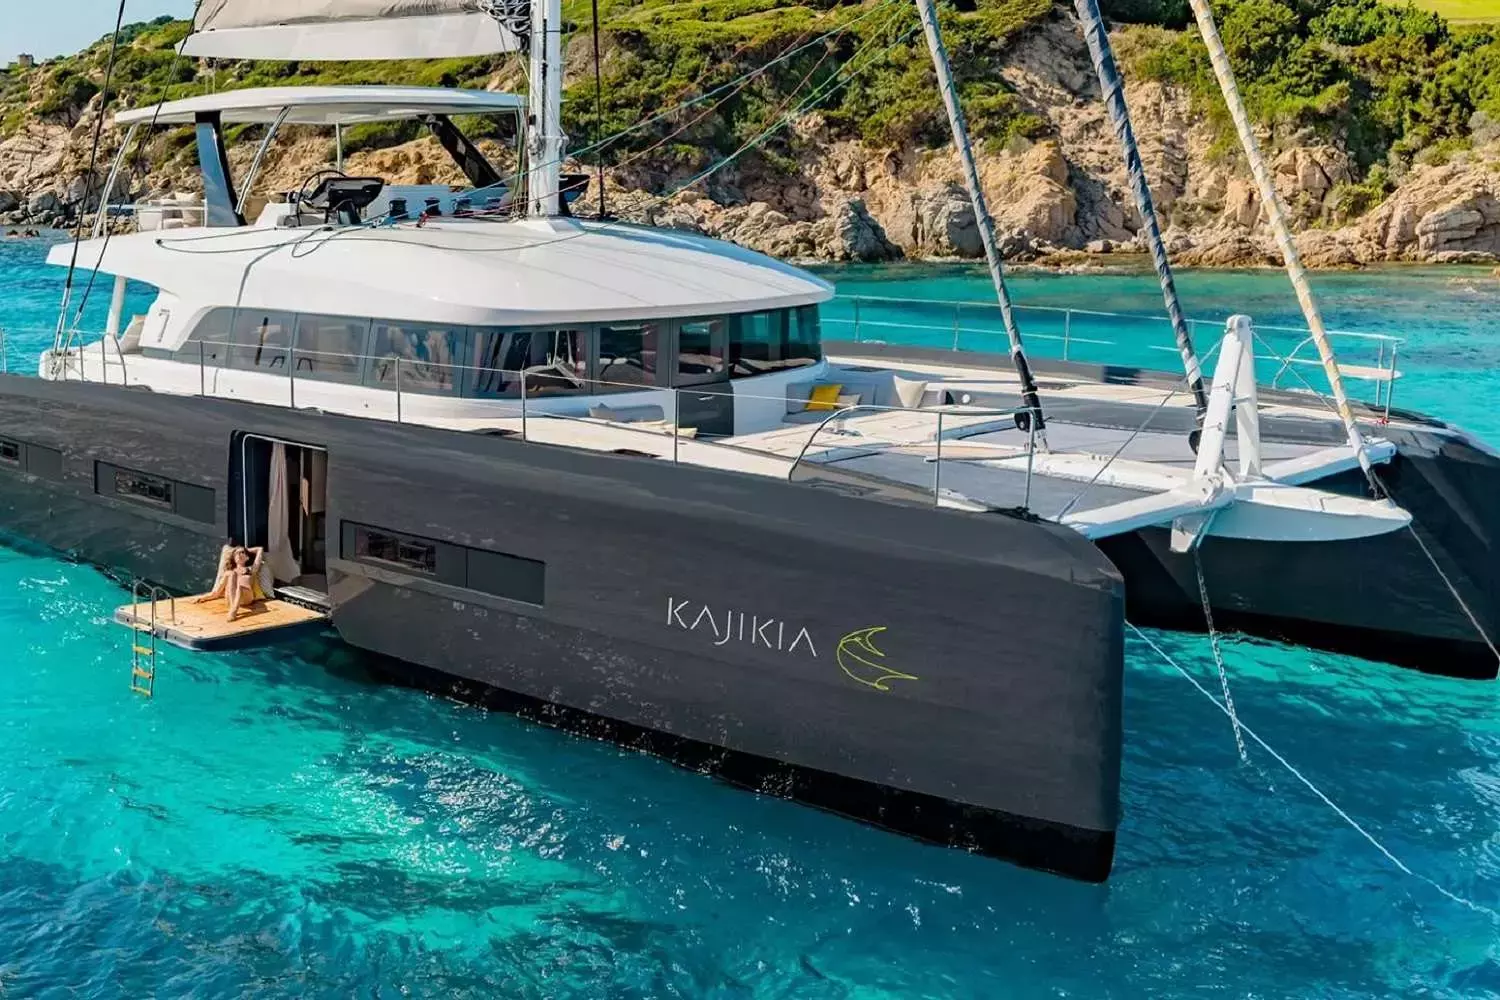 Kajikia by Lagoon - Special Offer for a private Luxury Catamaran Charter in Amalfi Coast with a crew